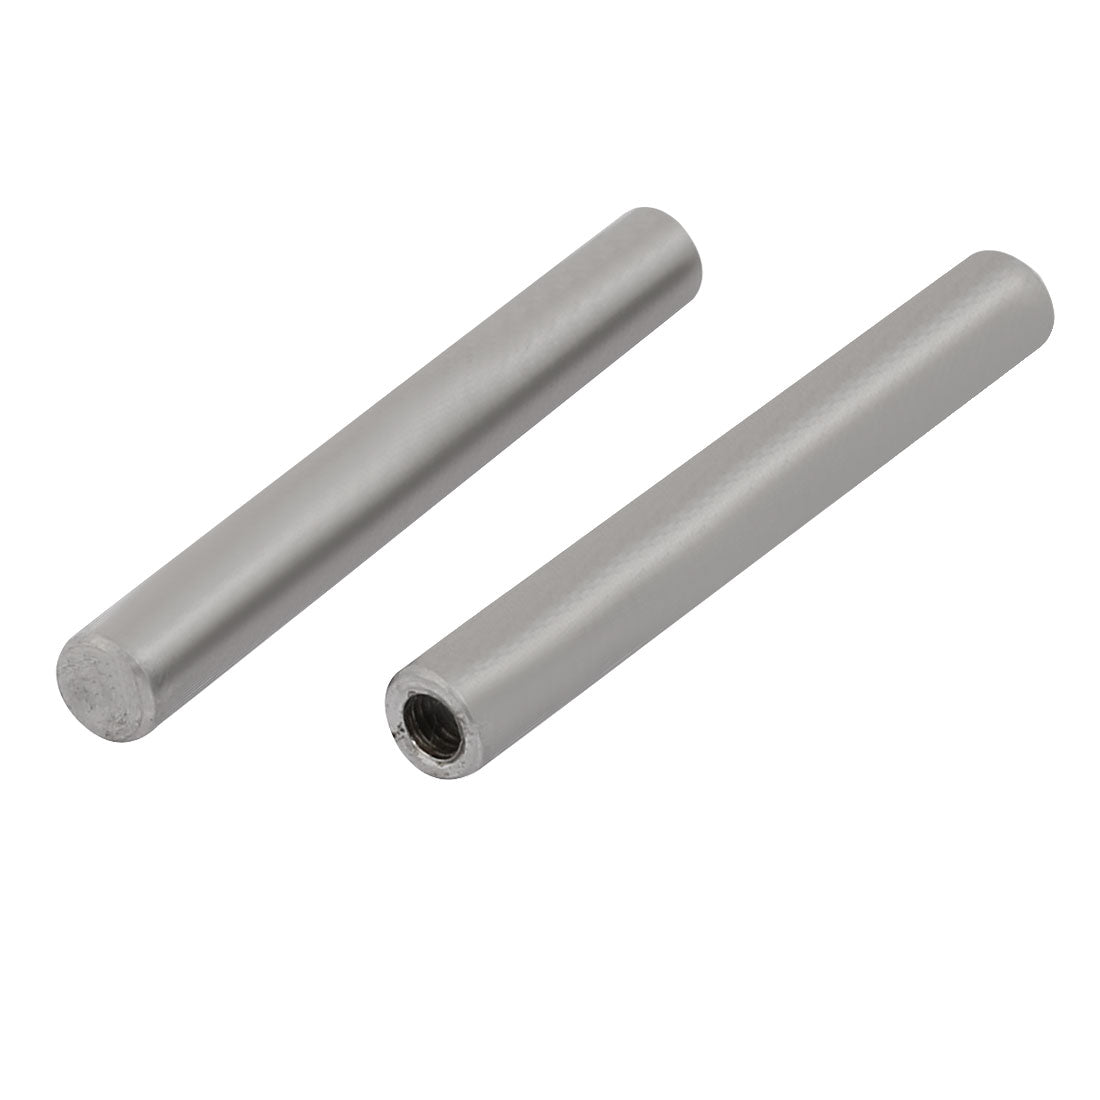 uxcell Uxcell 304 Stainless Steel M3 Female Thread 5mm x 40mm Cylindrical Dowel Pin 2pcs